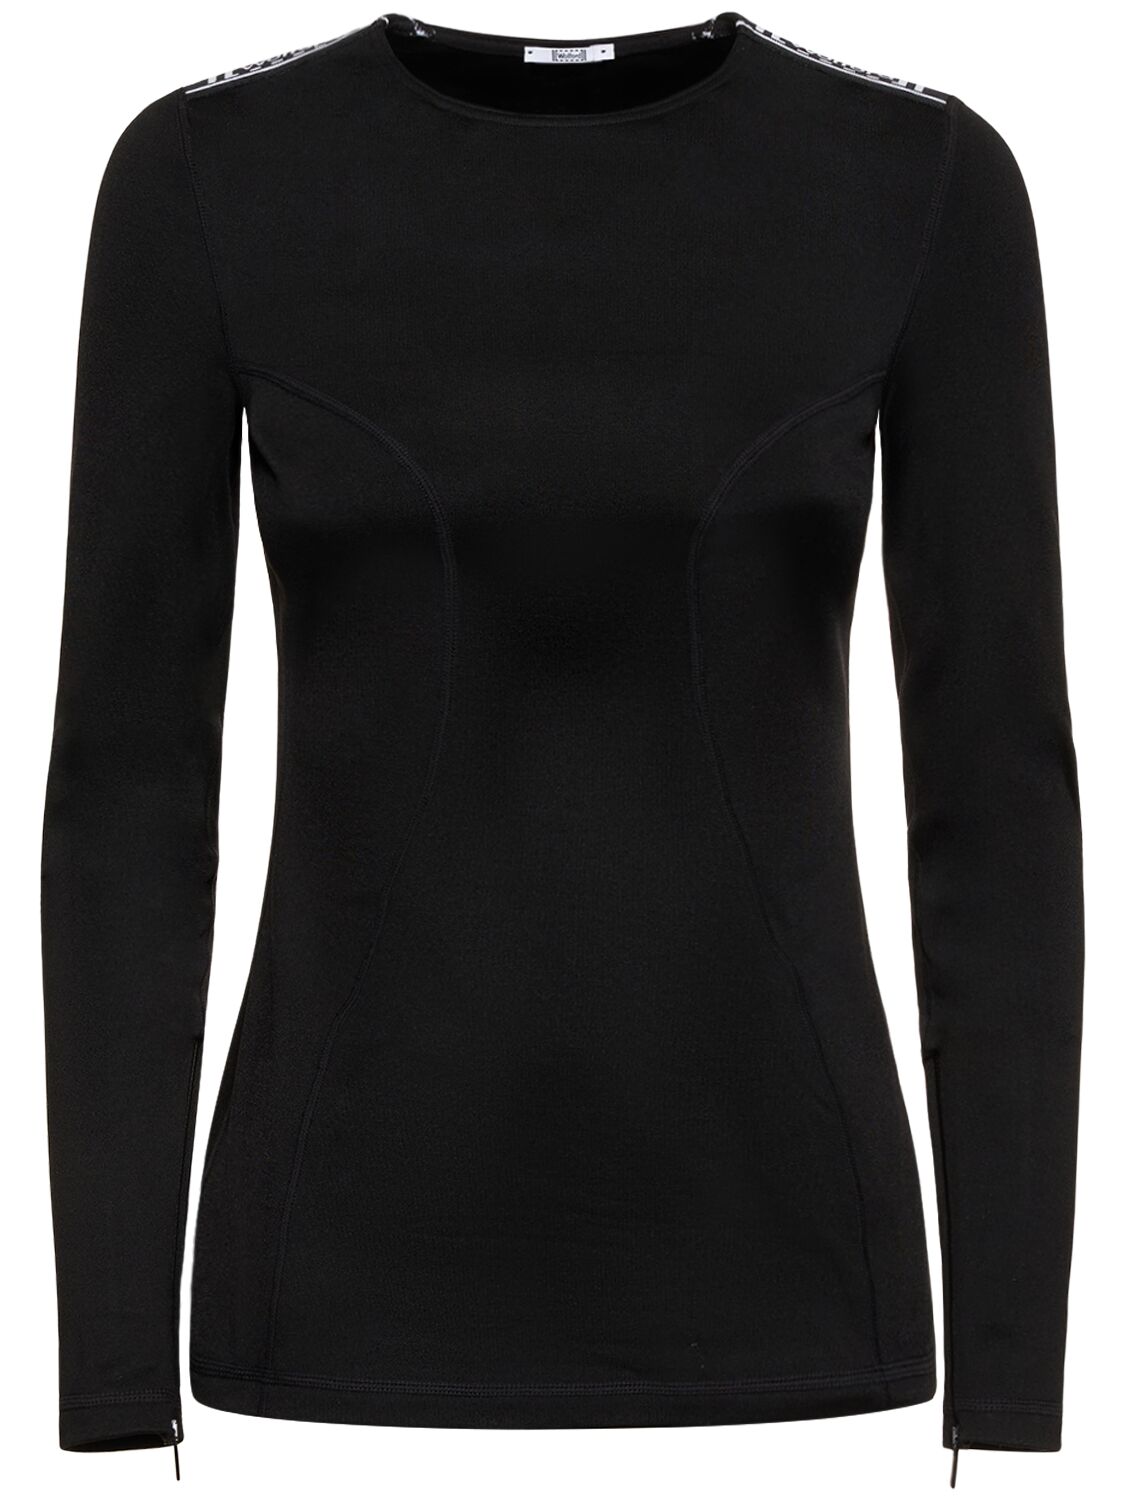 Thermal Stretch Tech Top